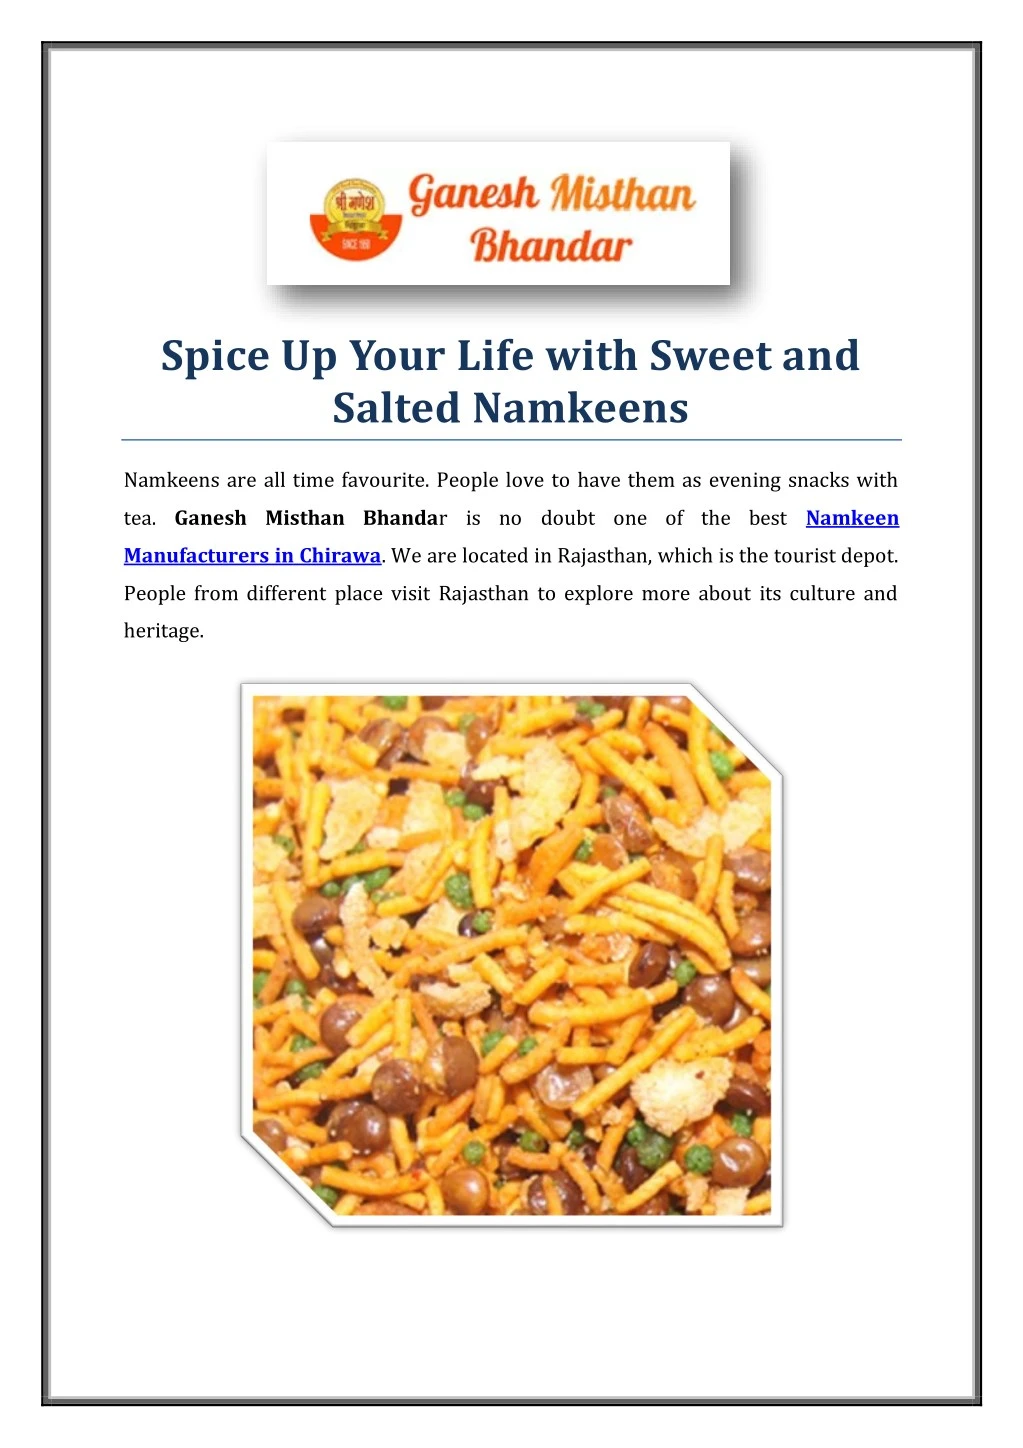 spice up your life with sweet and salted namkeens